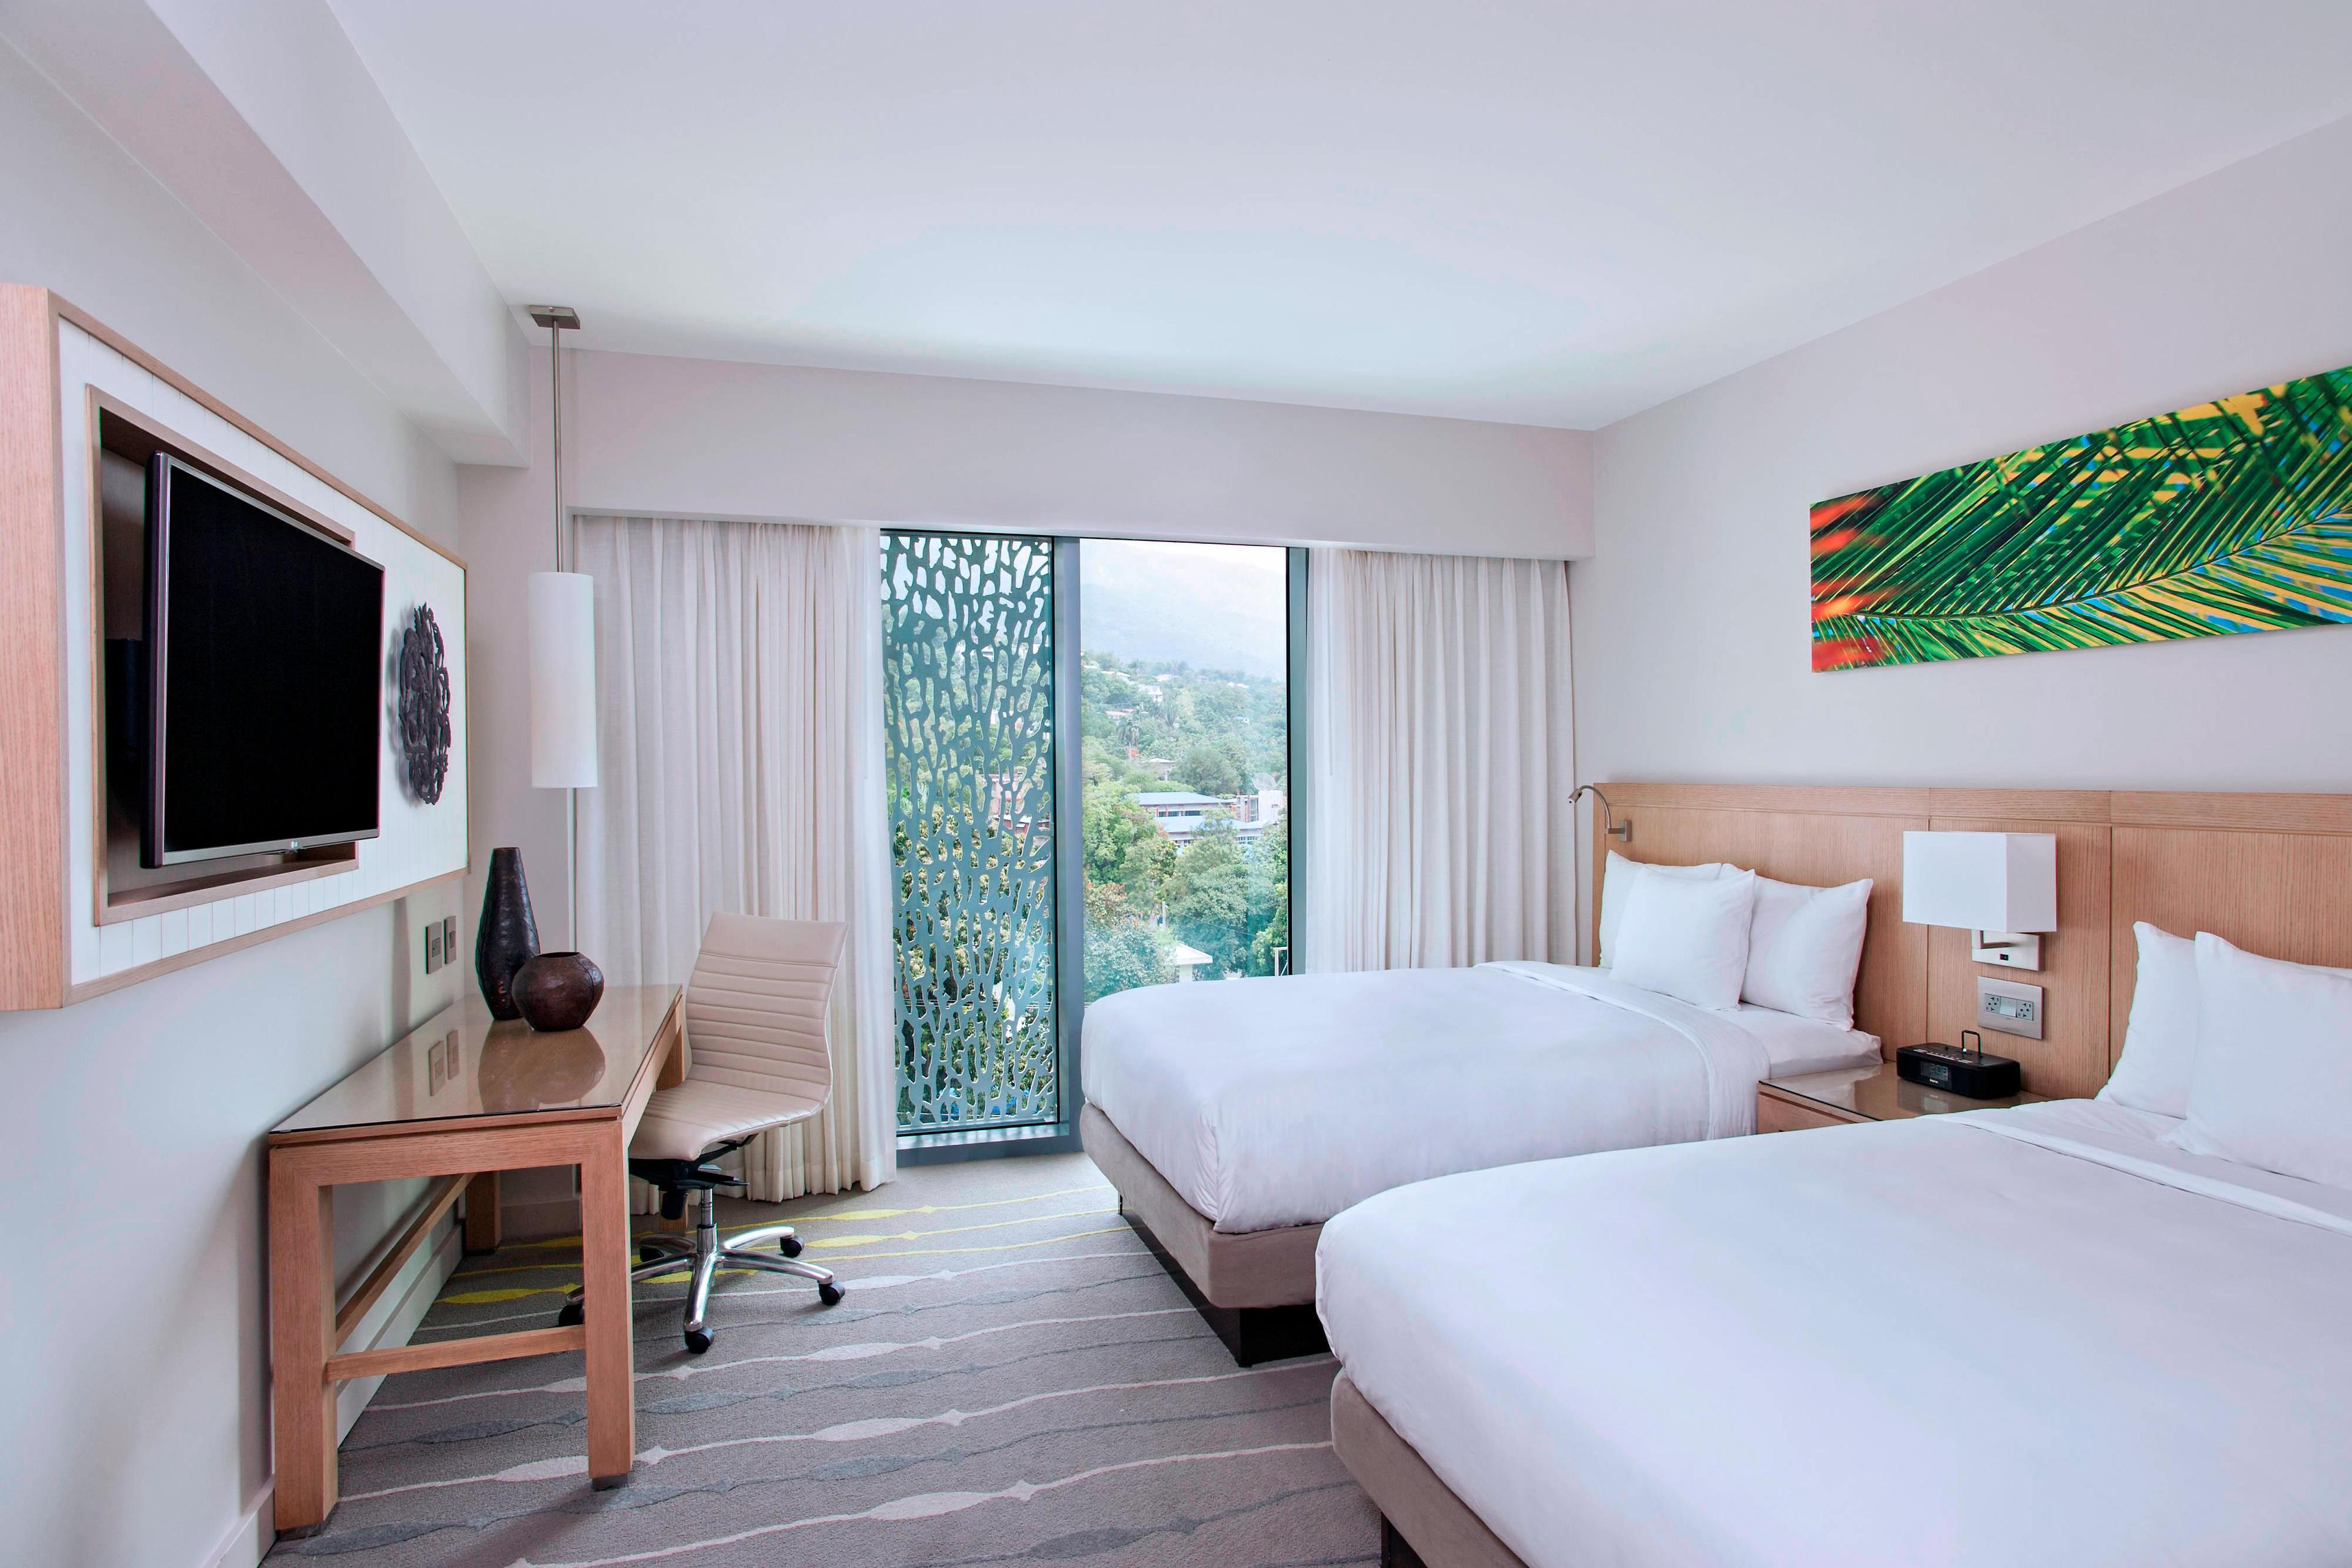 Inspired by the local beauty of Port Au Prince, our double/double guest rooms offer unique artwork, chic furnishings and floor-to-ceiling windows.